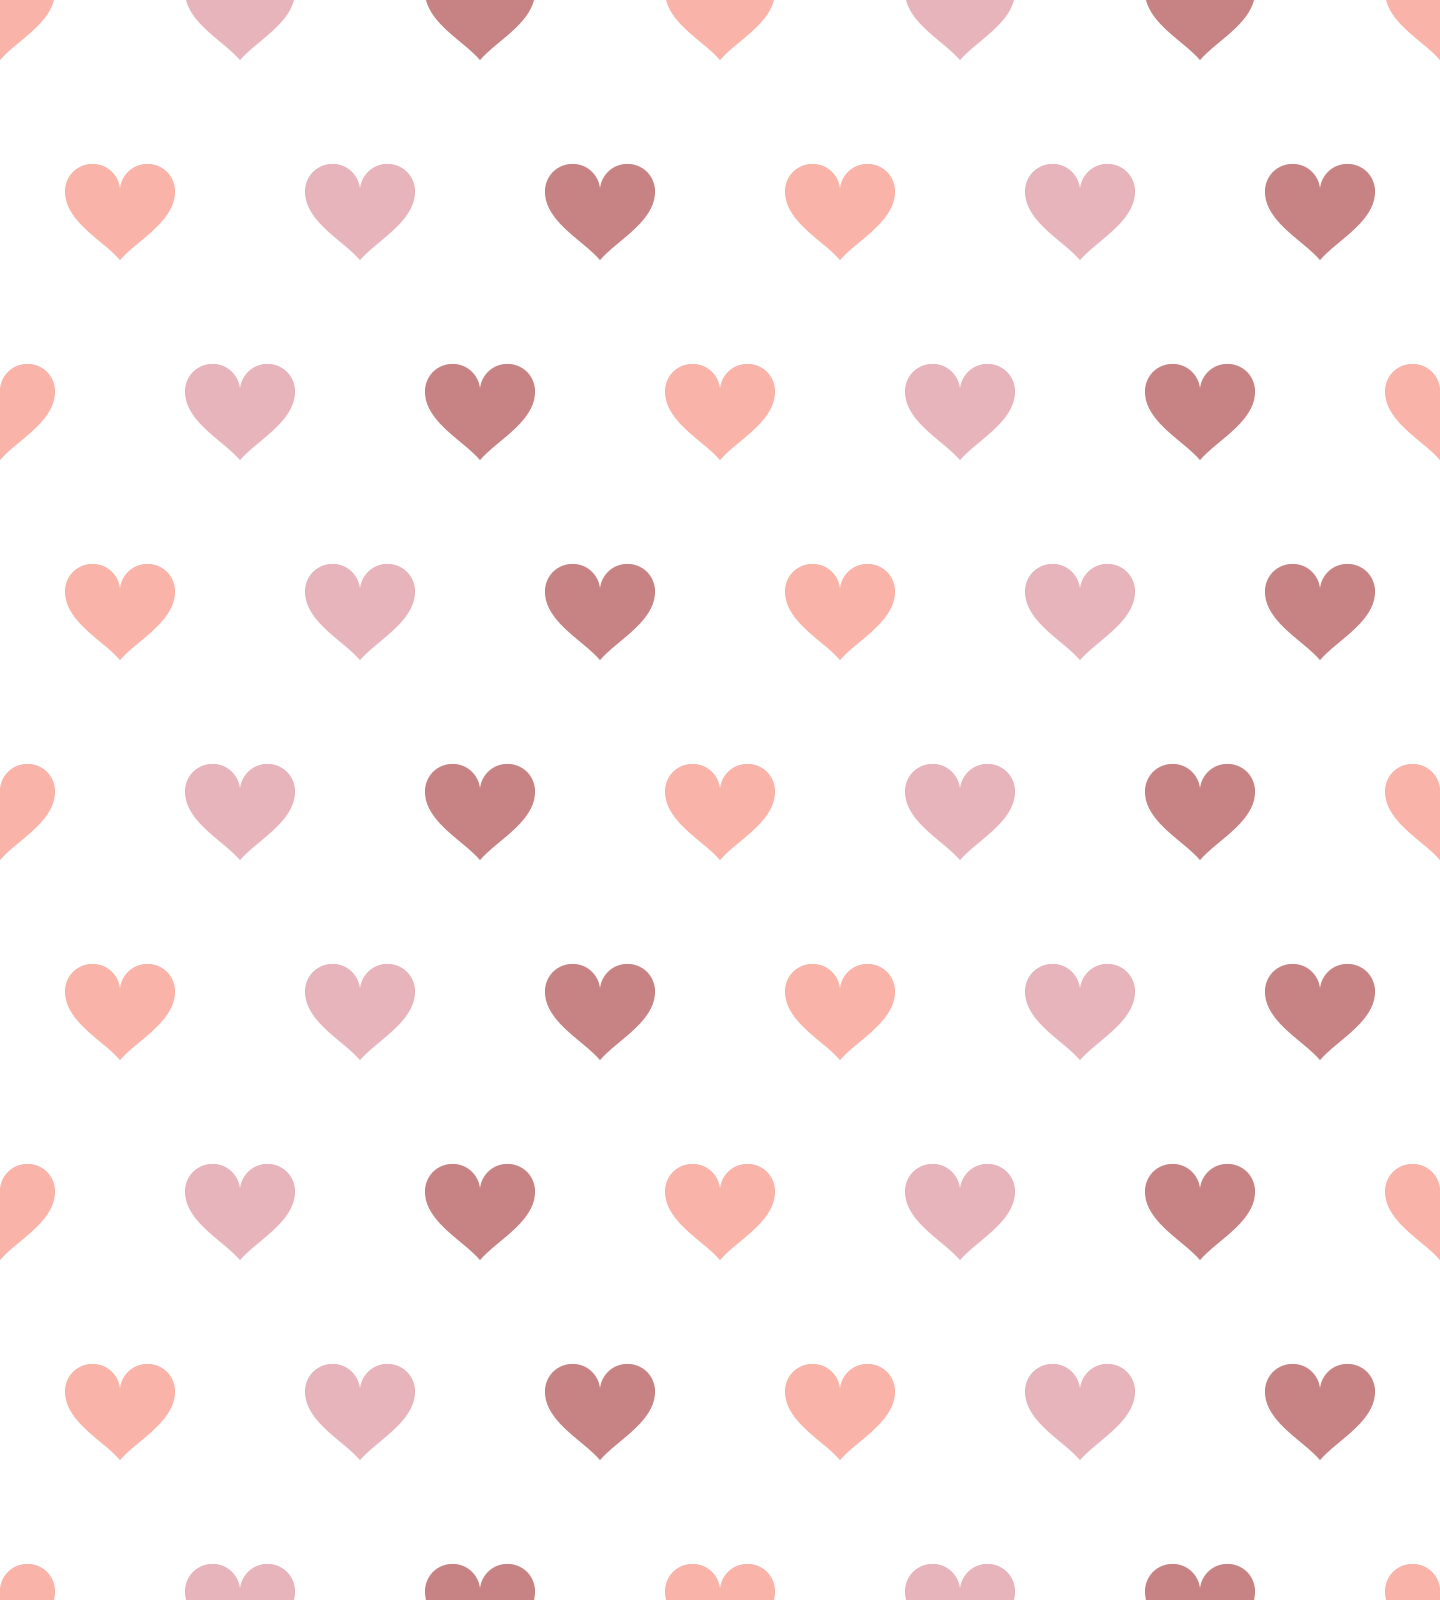 Pink Hearts Vector Pattern On White Background (SVG)